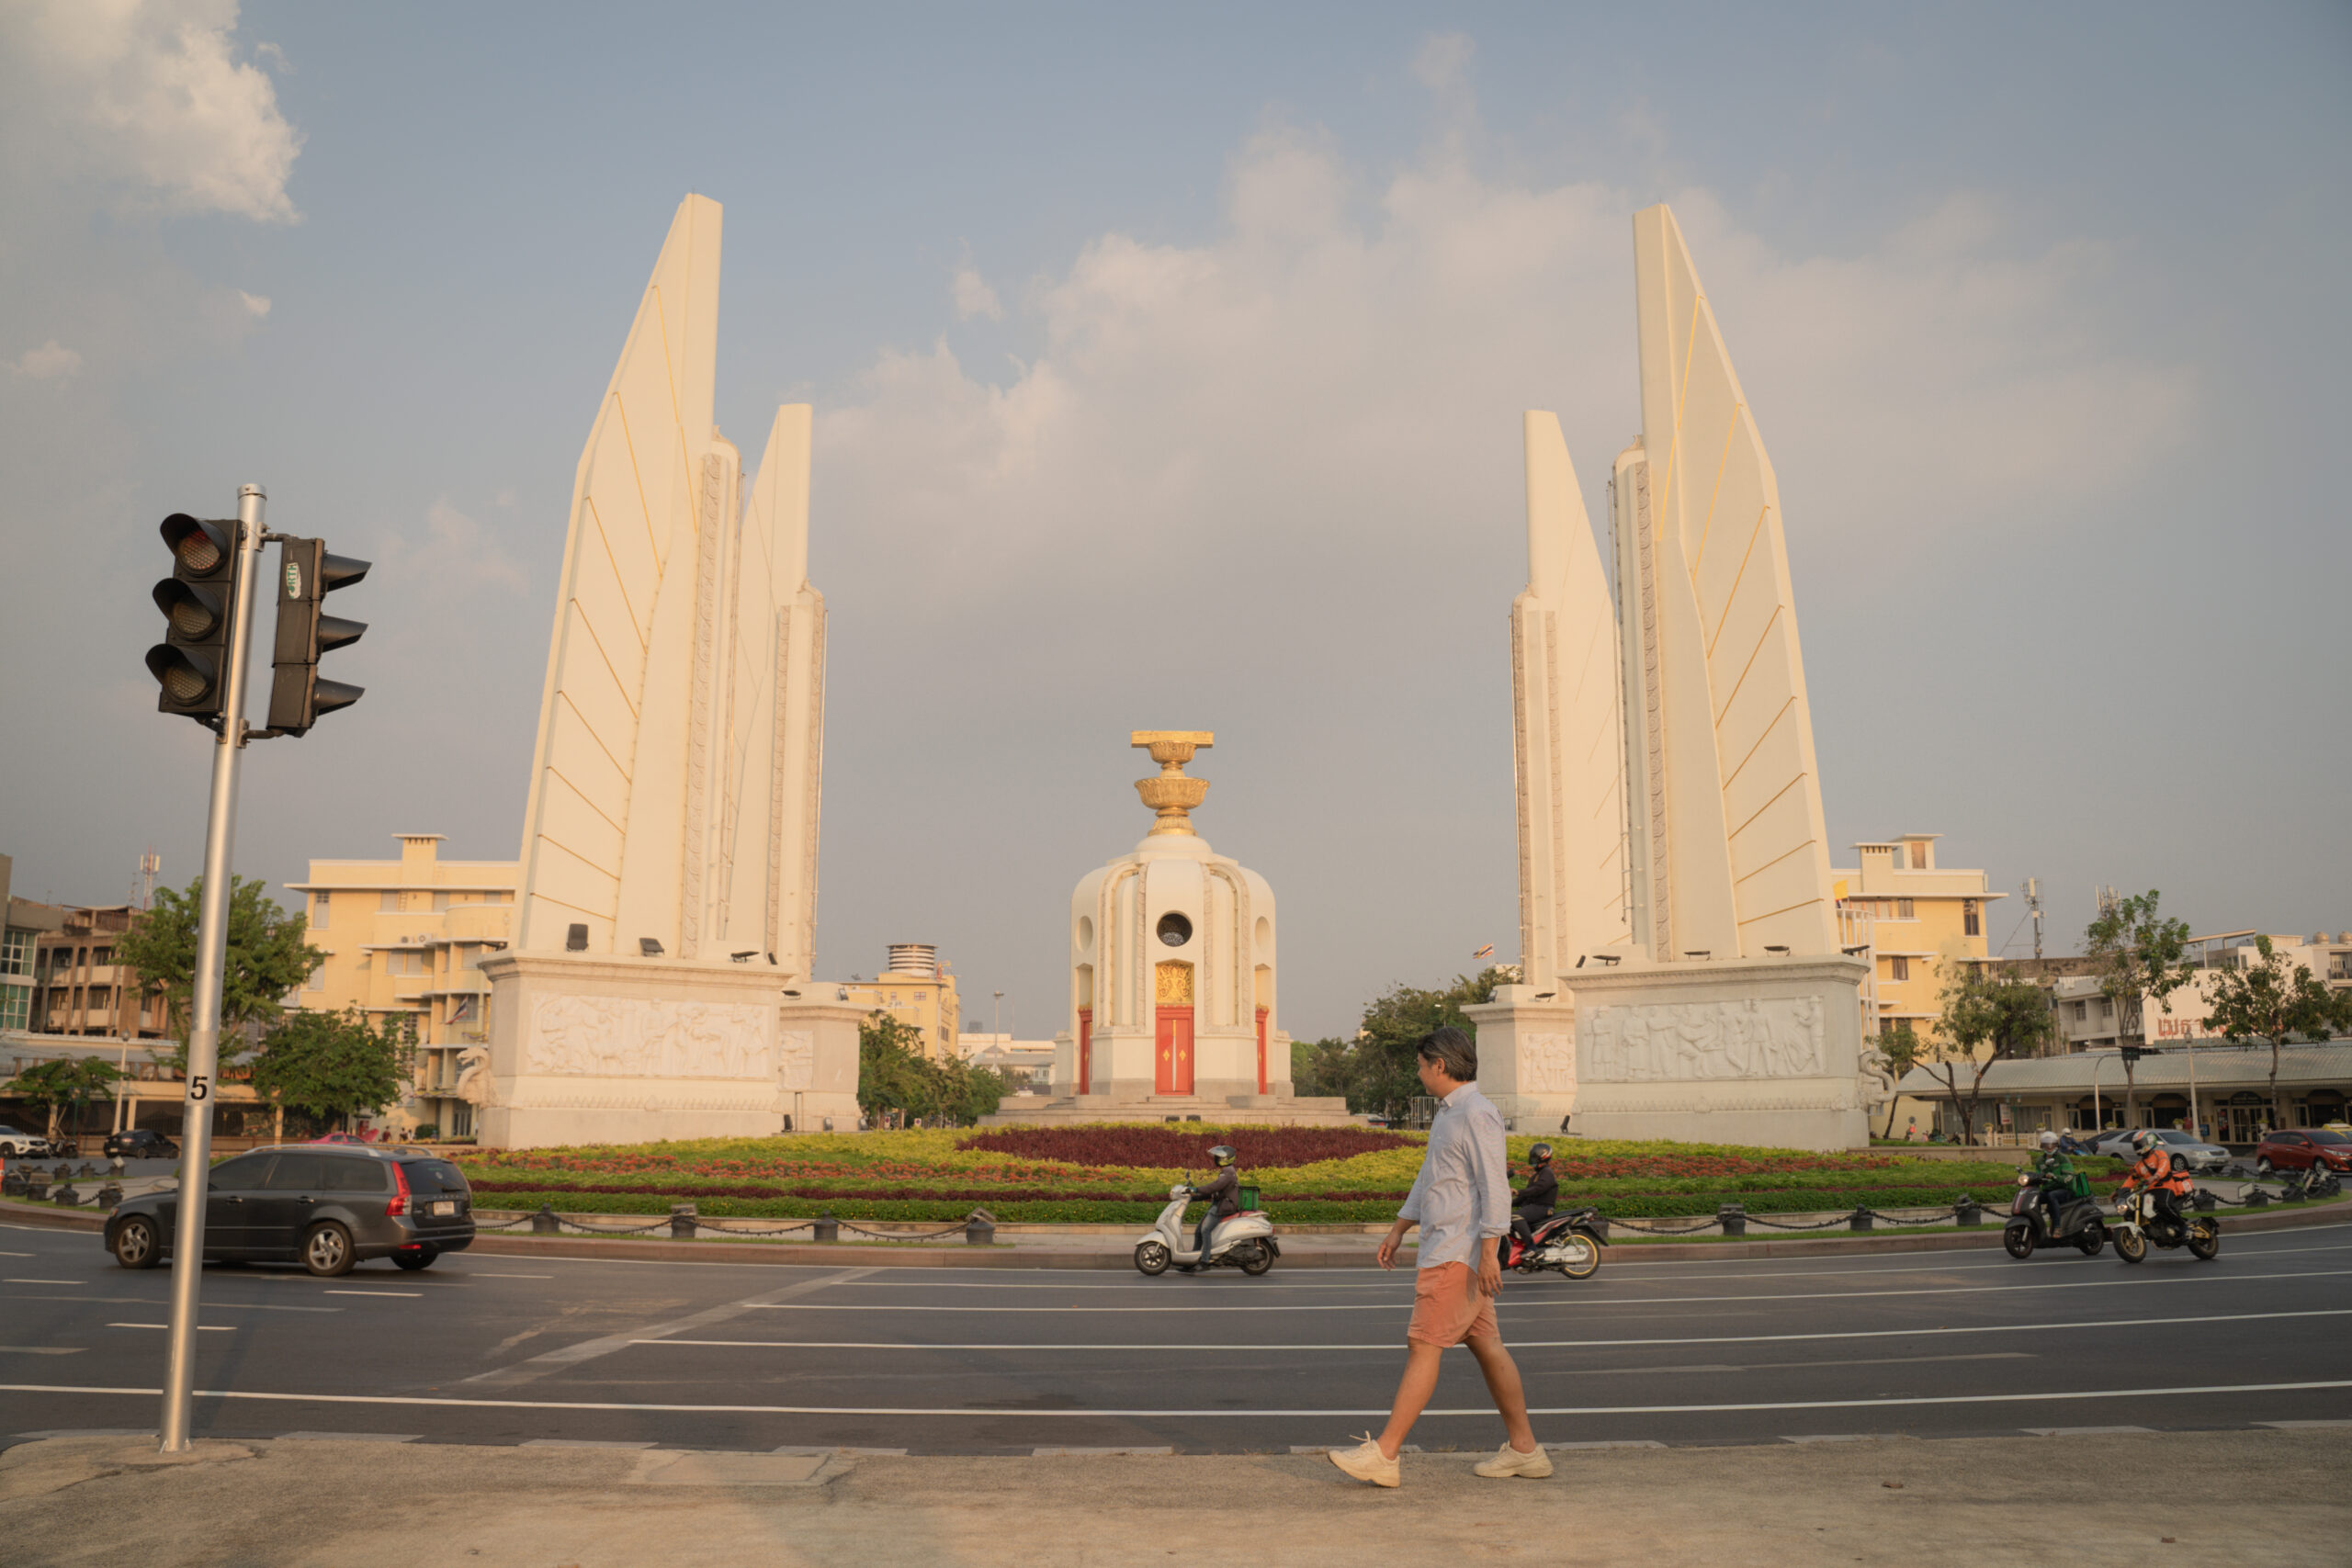 "The Democracy Monument was erected in 1939 to commemorate the 1932 Siamese Revolution. This was a bloodless coup against King Prajadhipok, staged by a group of military and civil officers. It changed the system of government in Siam (today’s Thailand) from an absolute monarchy to a constitutional monarchy."